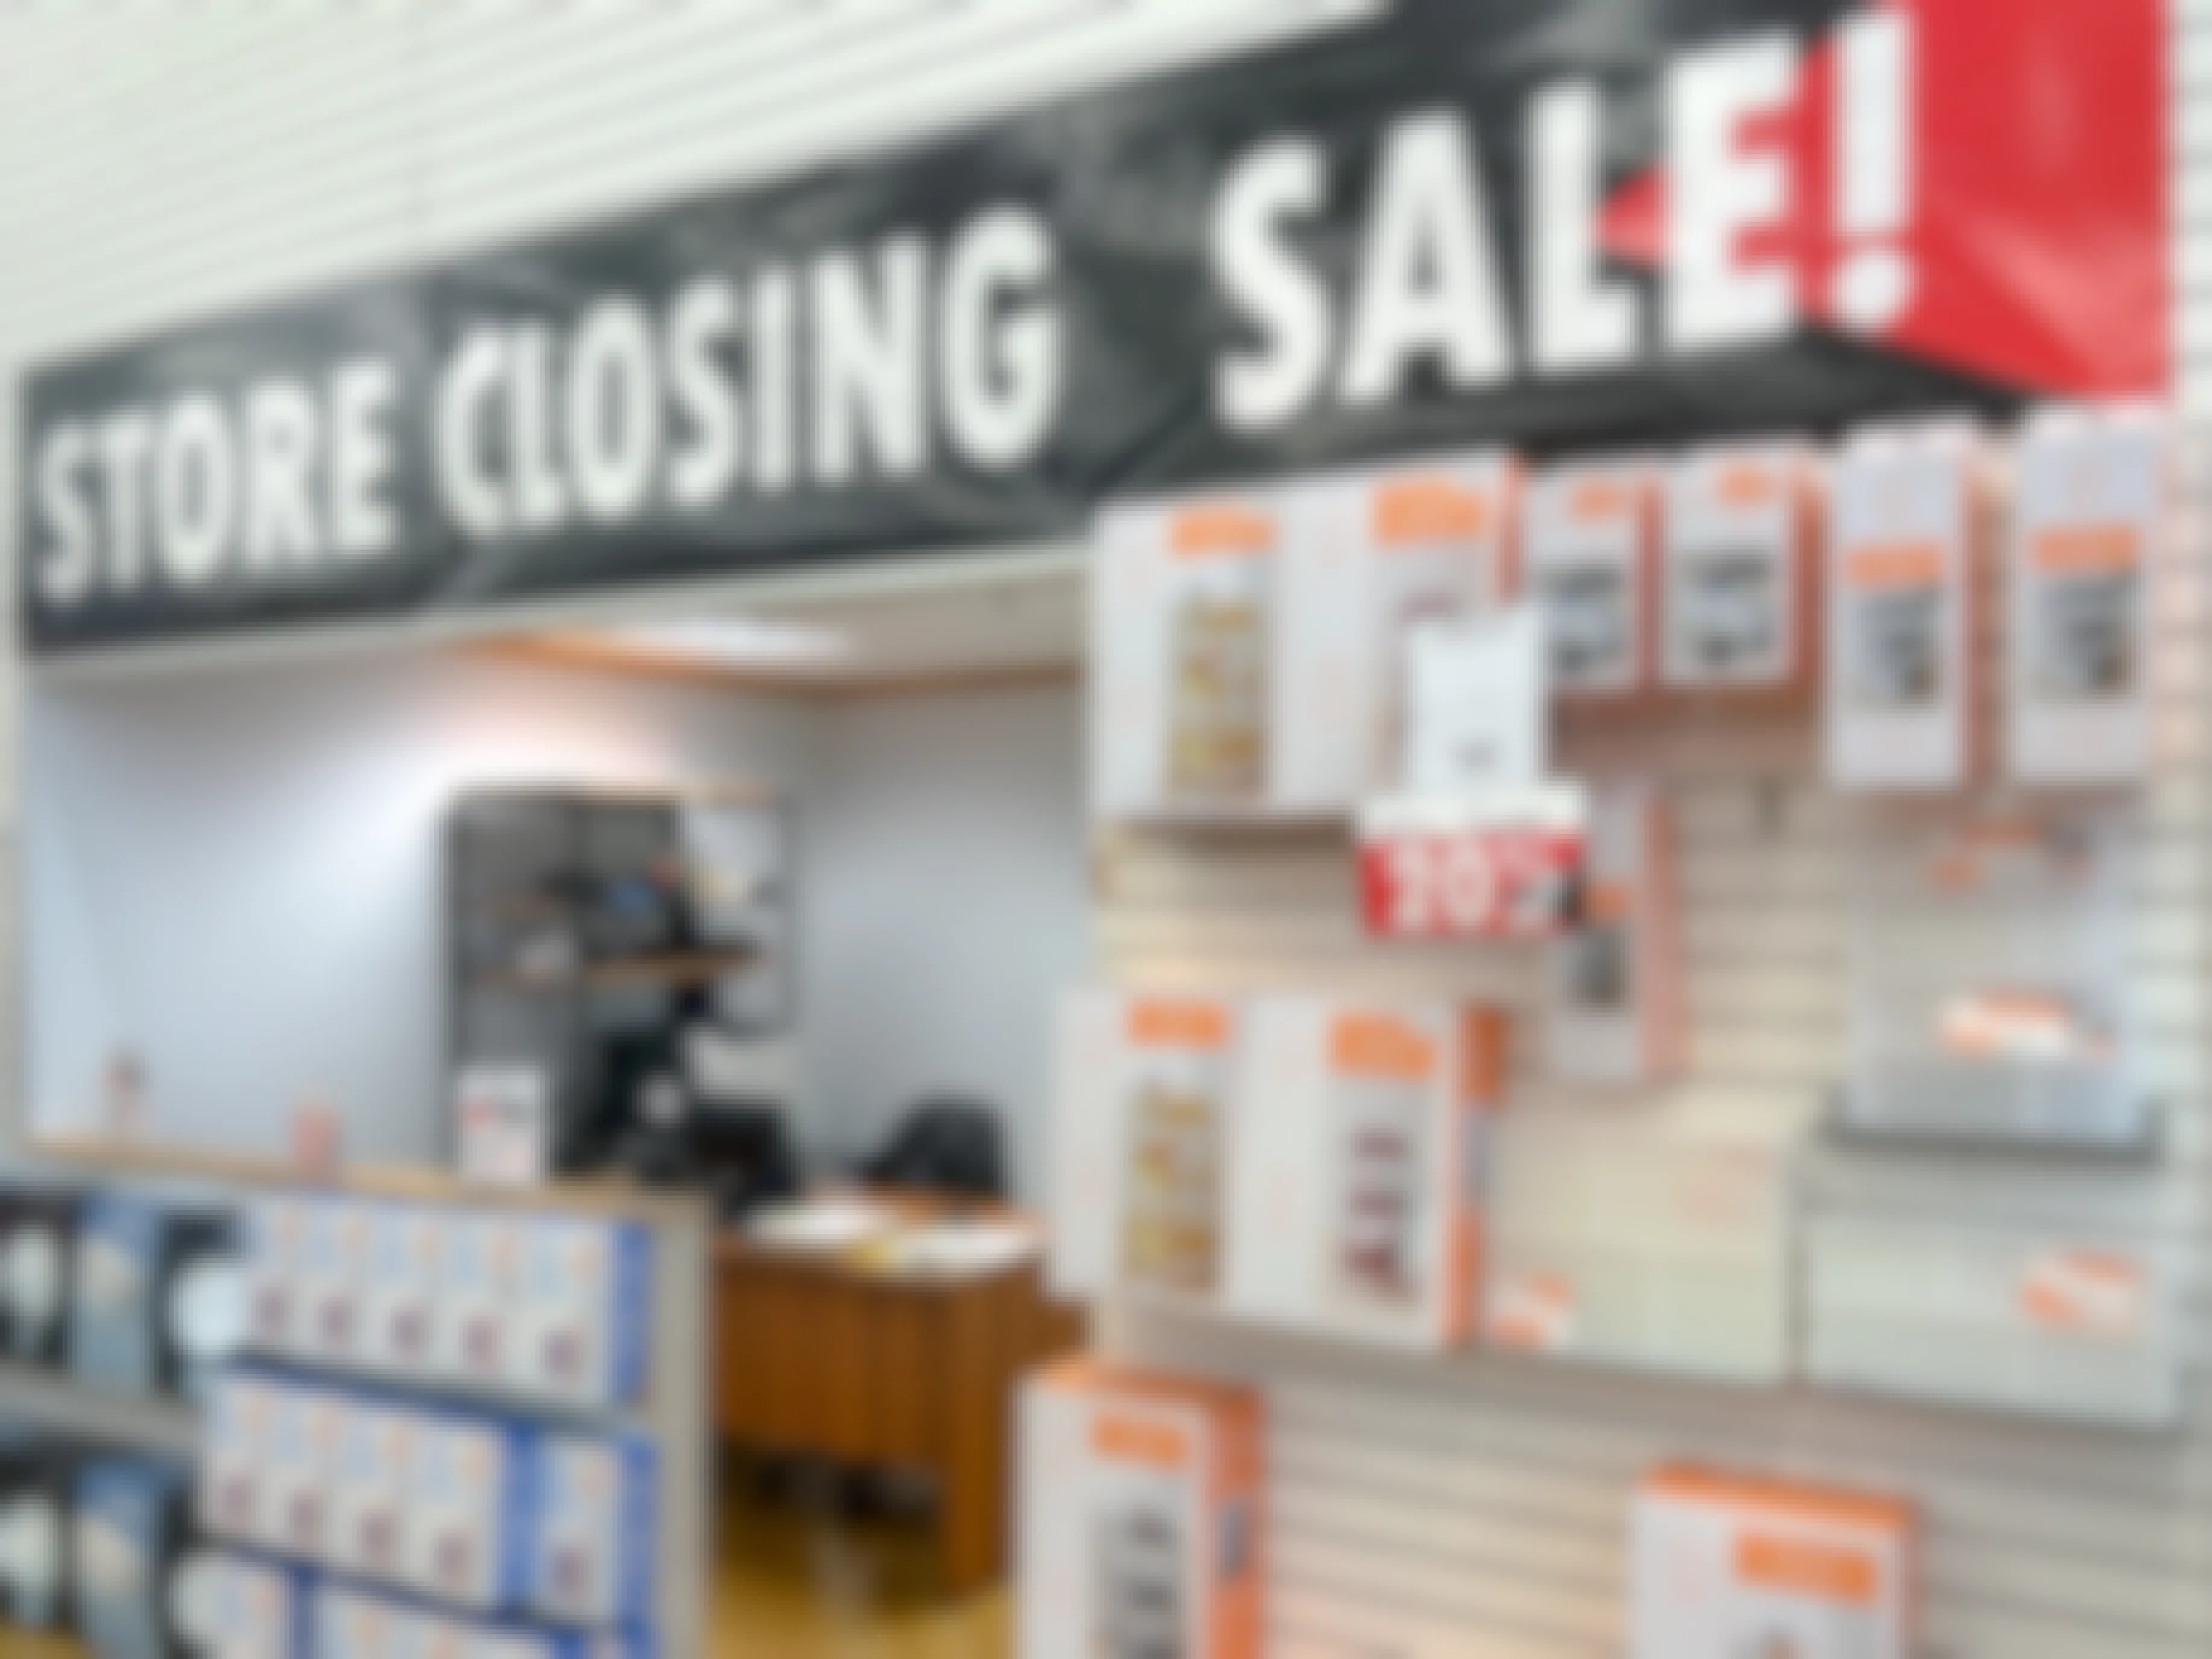 utility storage clearance at closing bed bath and beyond store with banner